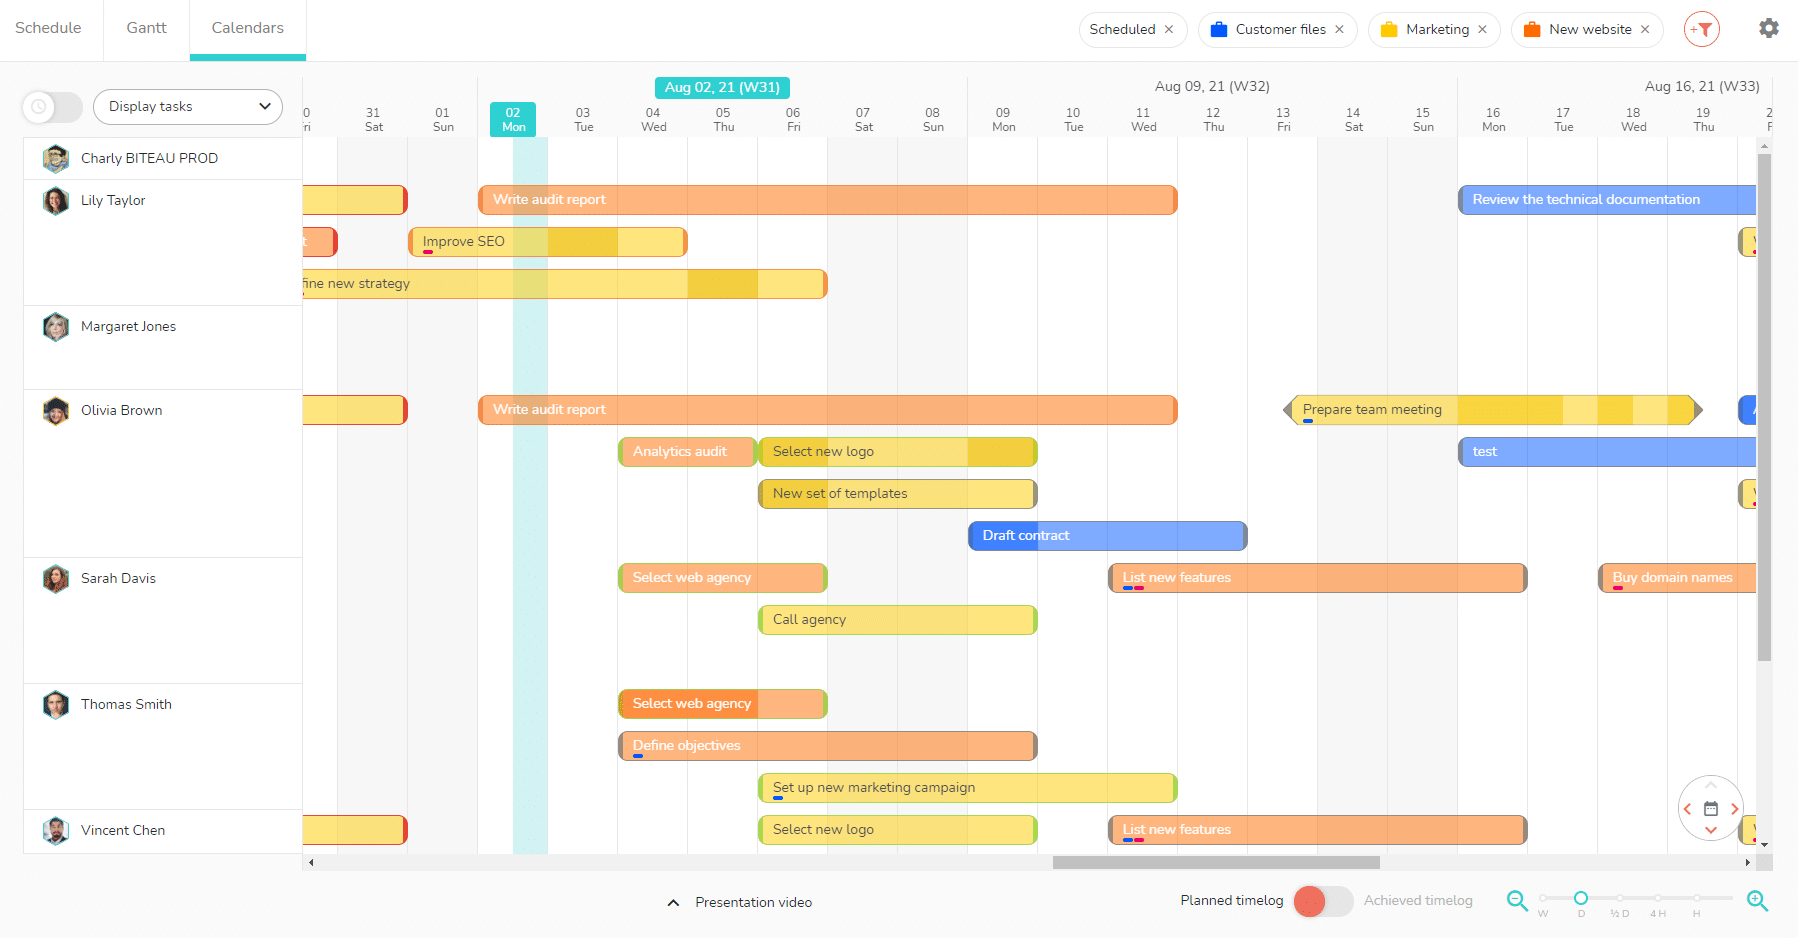 The calendar view in multi-projects displays the schedules of several projects at once.